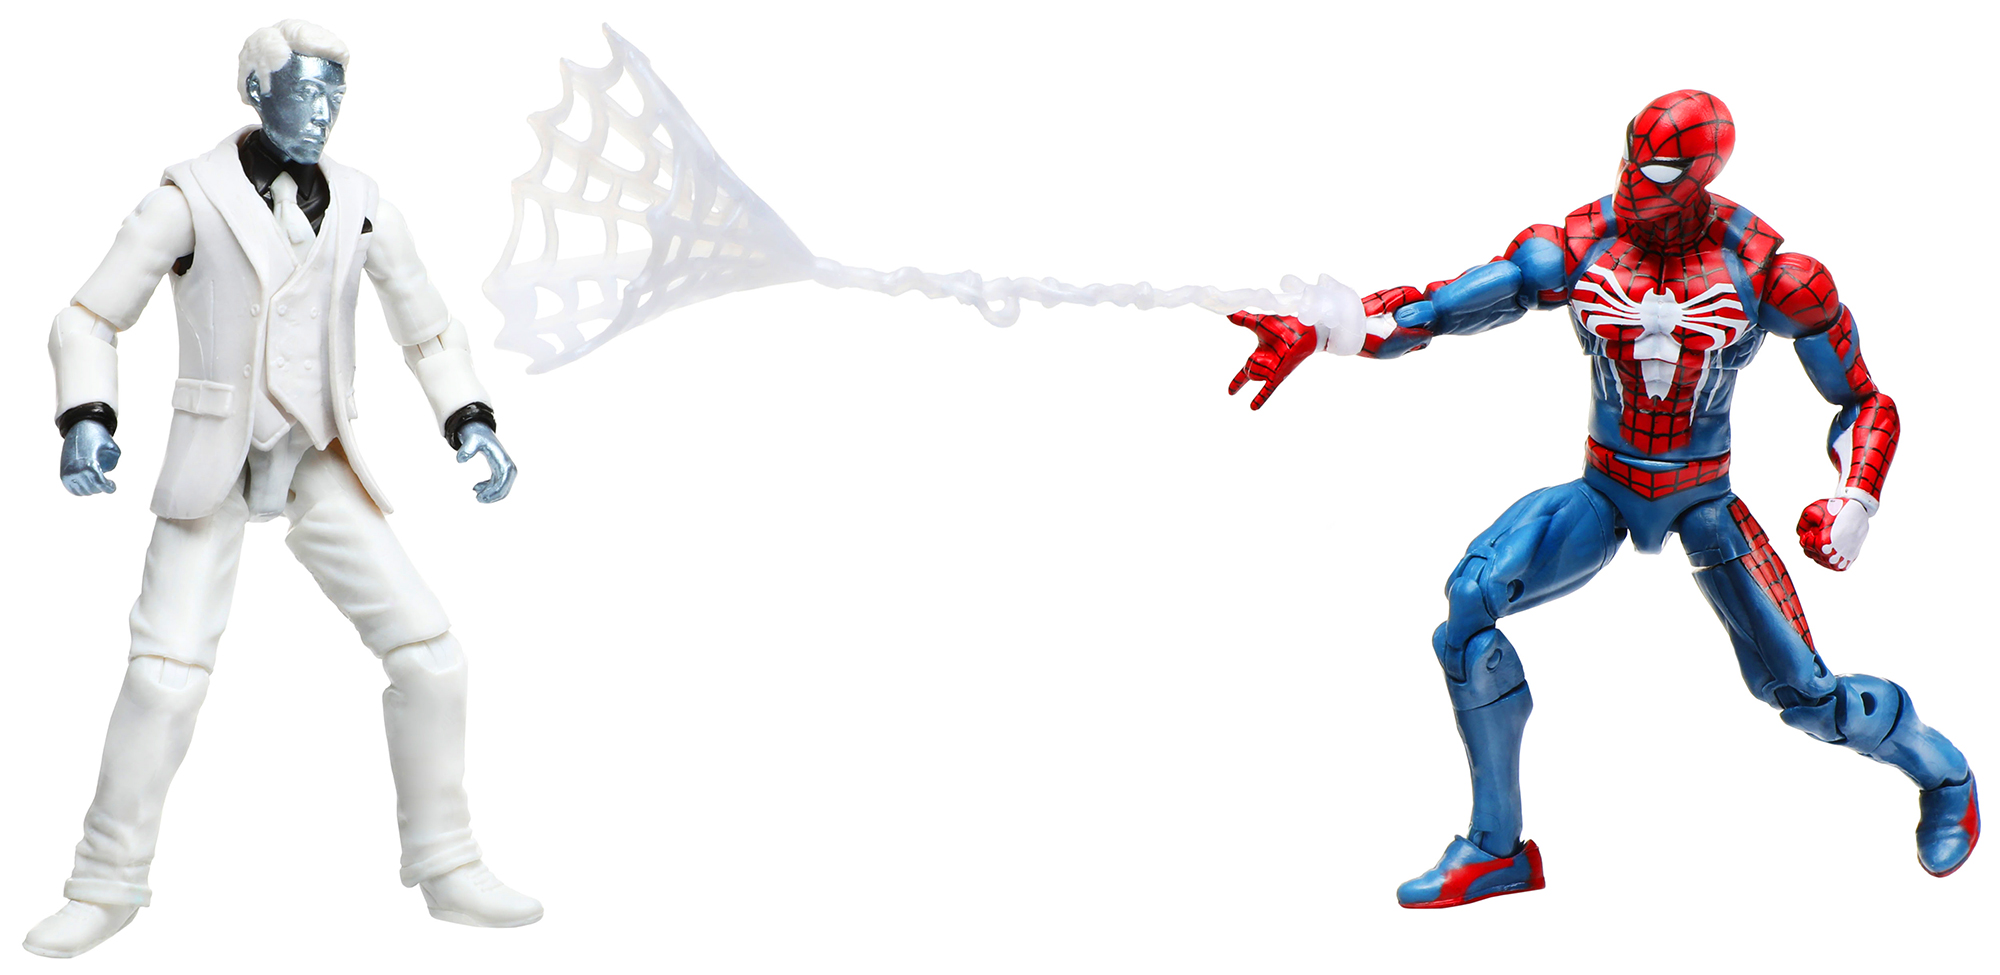 The PS4 Spider-Man Heads To Your Toy Shelf, And More Of The Most Spectacular Toys Of The Week